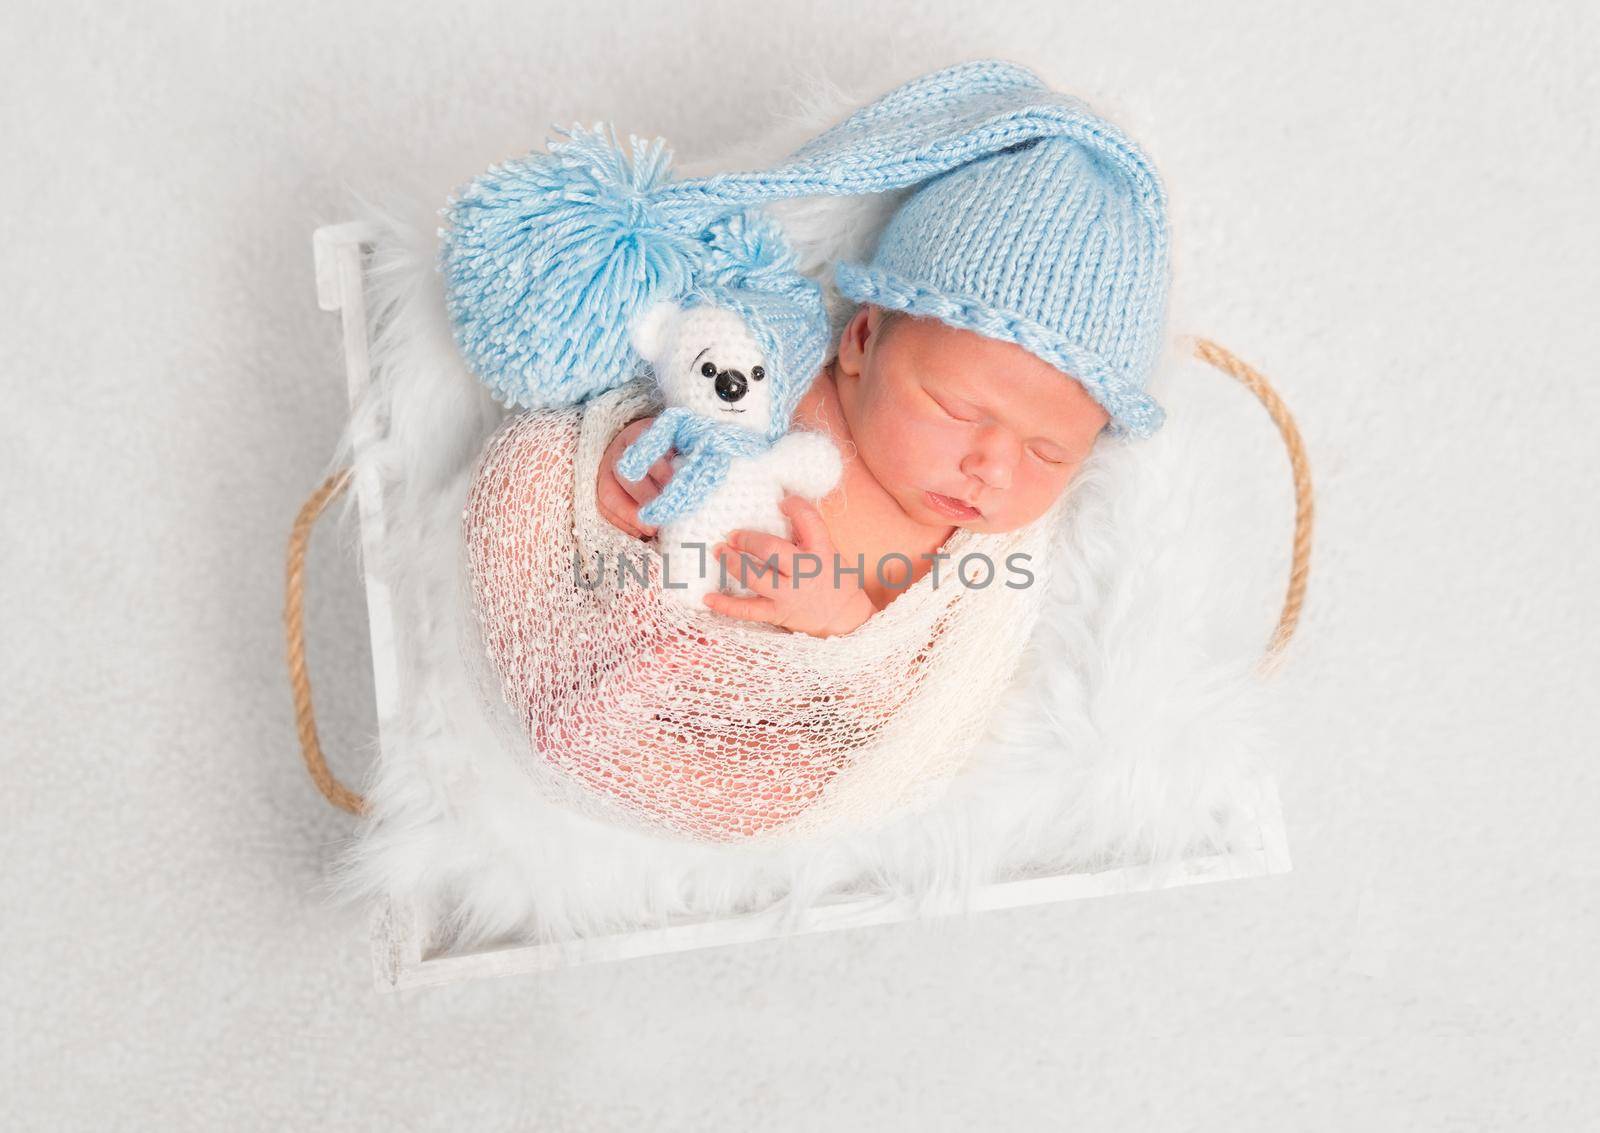 Sleeping kid in enourmous knitted hat holding a teddy, wrapped in a blanket, topview